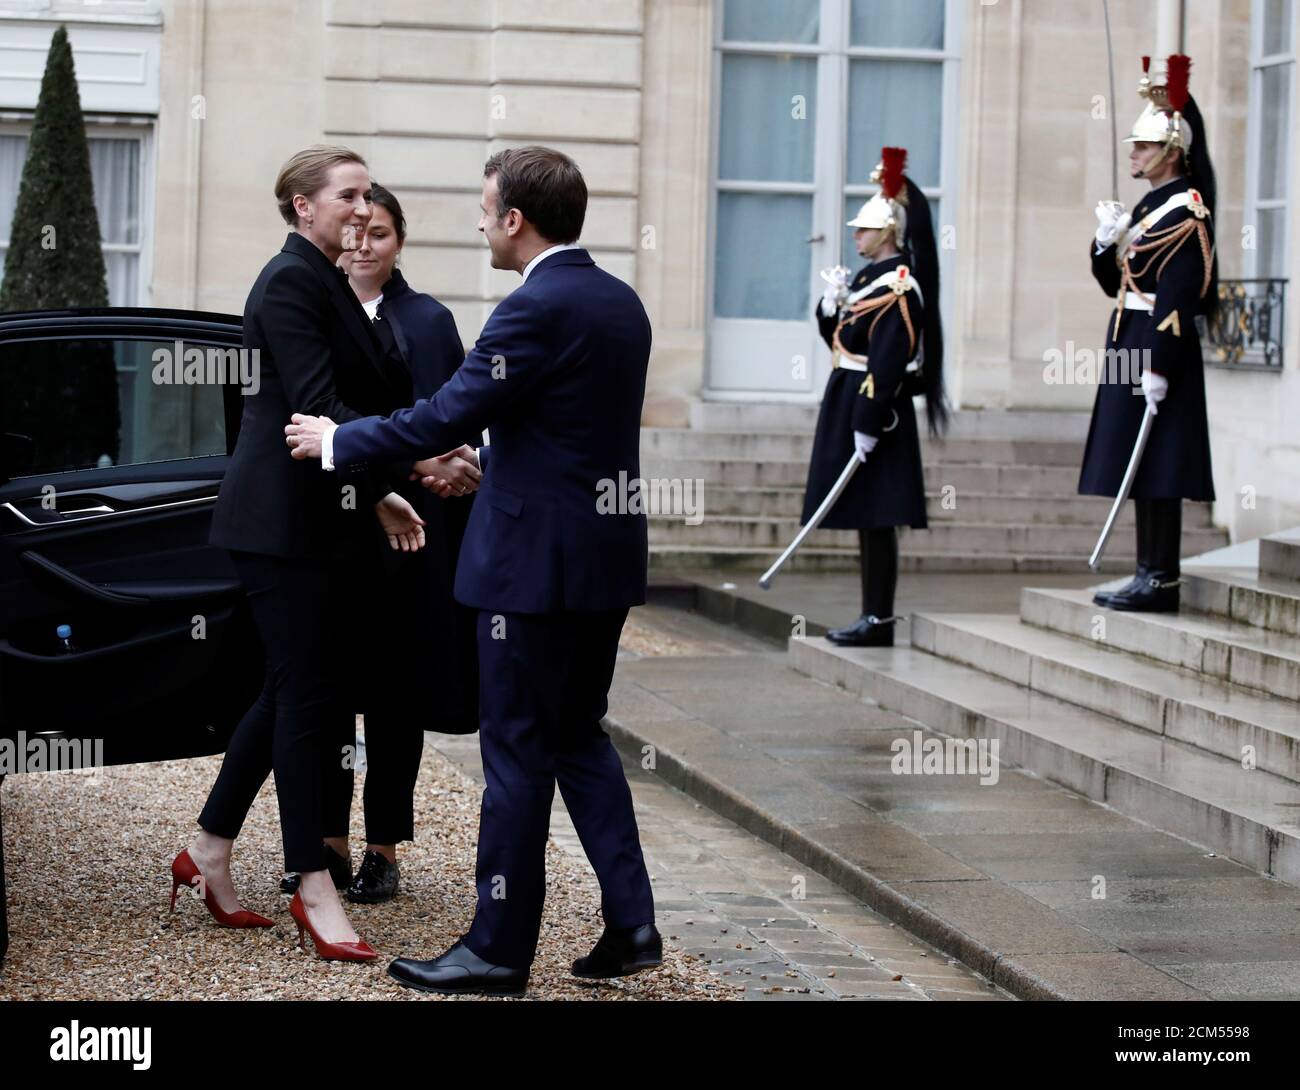 French President Emmanuel Macron welcomes Danish Prime Minister Mette  Frederiksen at the Elysee Palace in Paris, France, November 18, 2019.  REUTERS/Benoit Tessier Stock Photo - Alamy